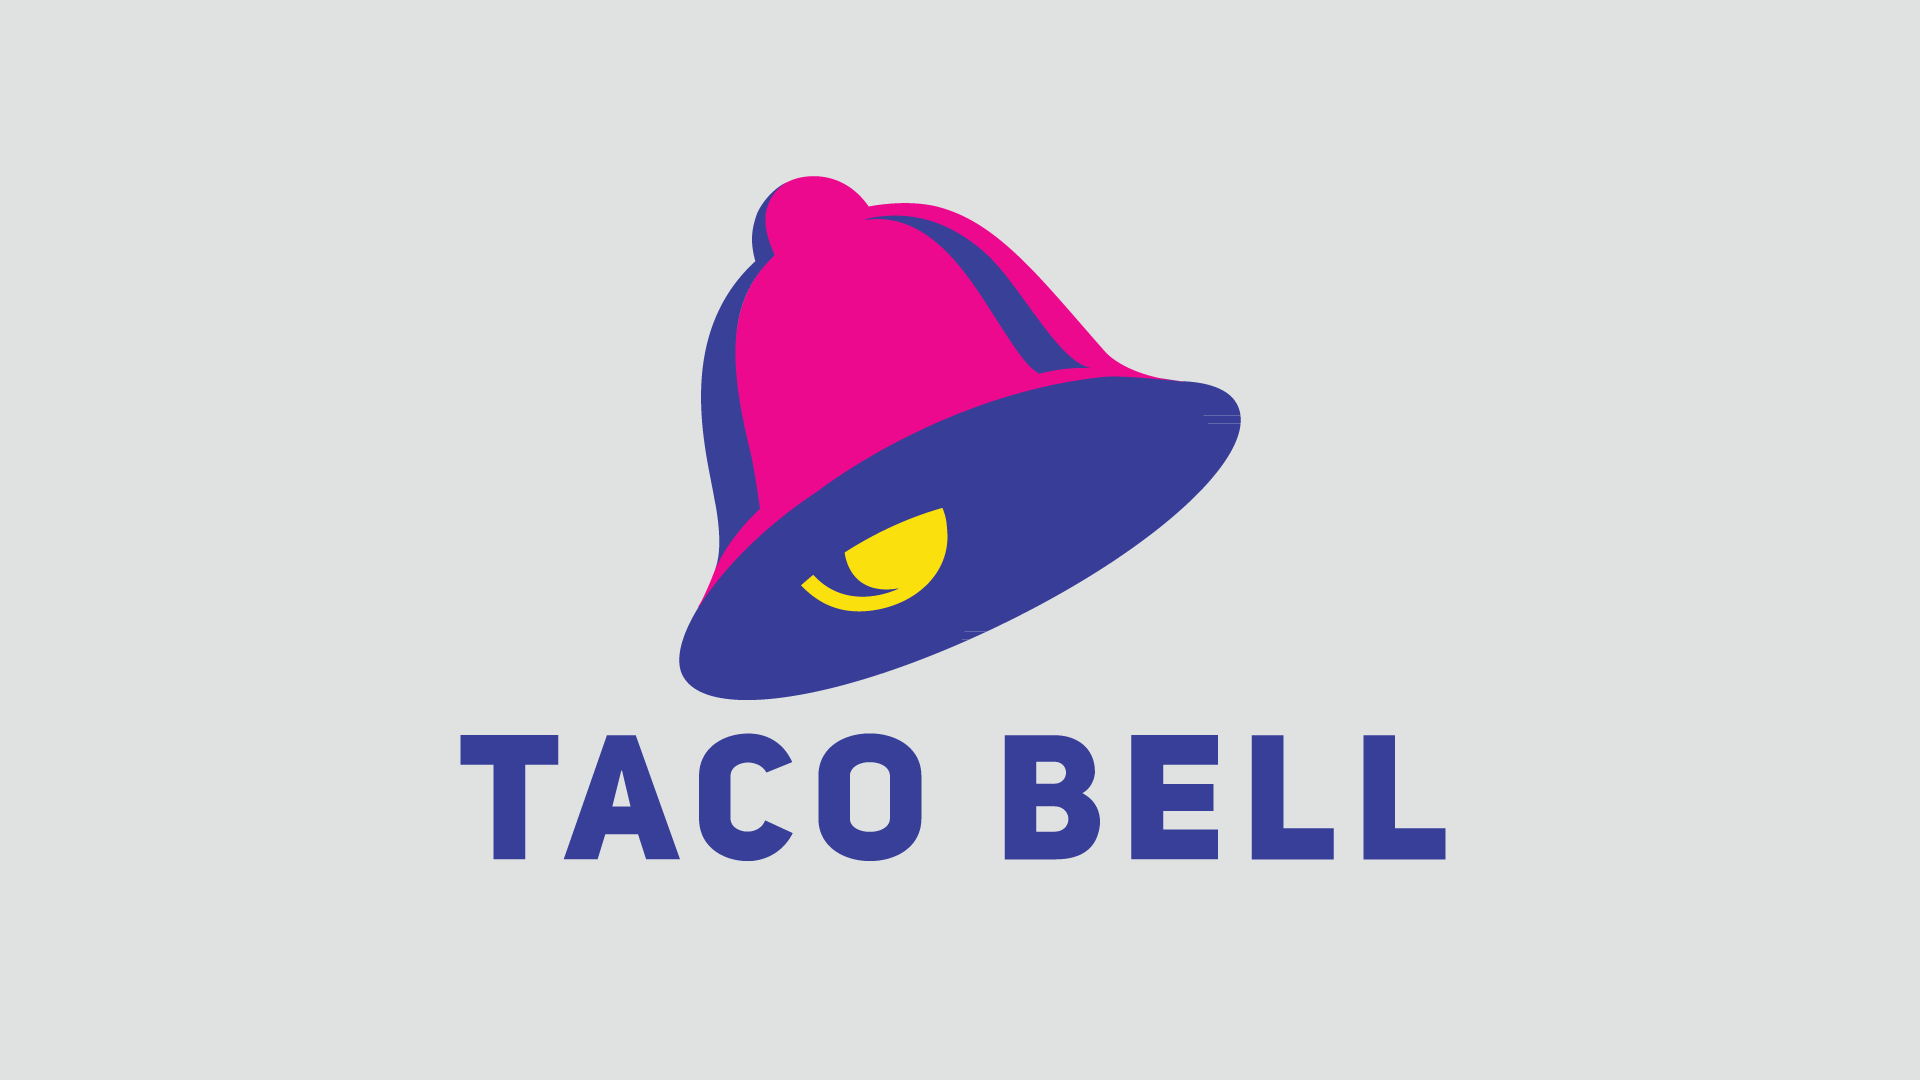 Old Taco Bell Logo - Taco Bell Re Brand